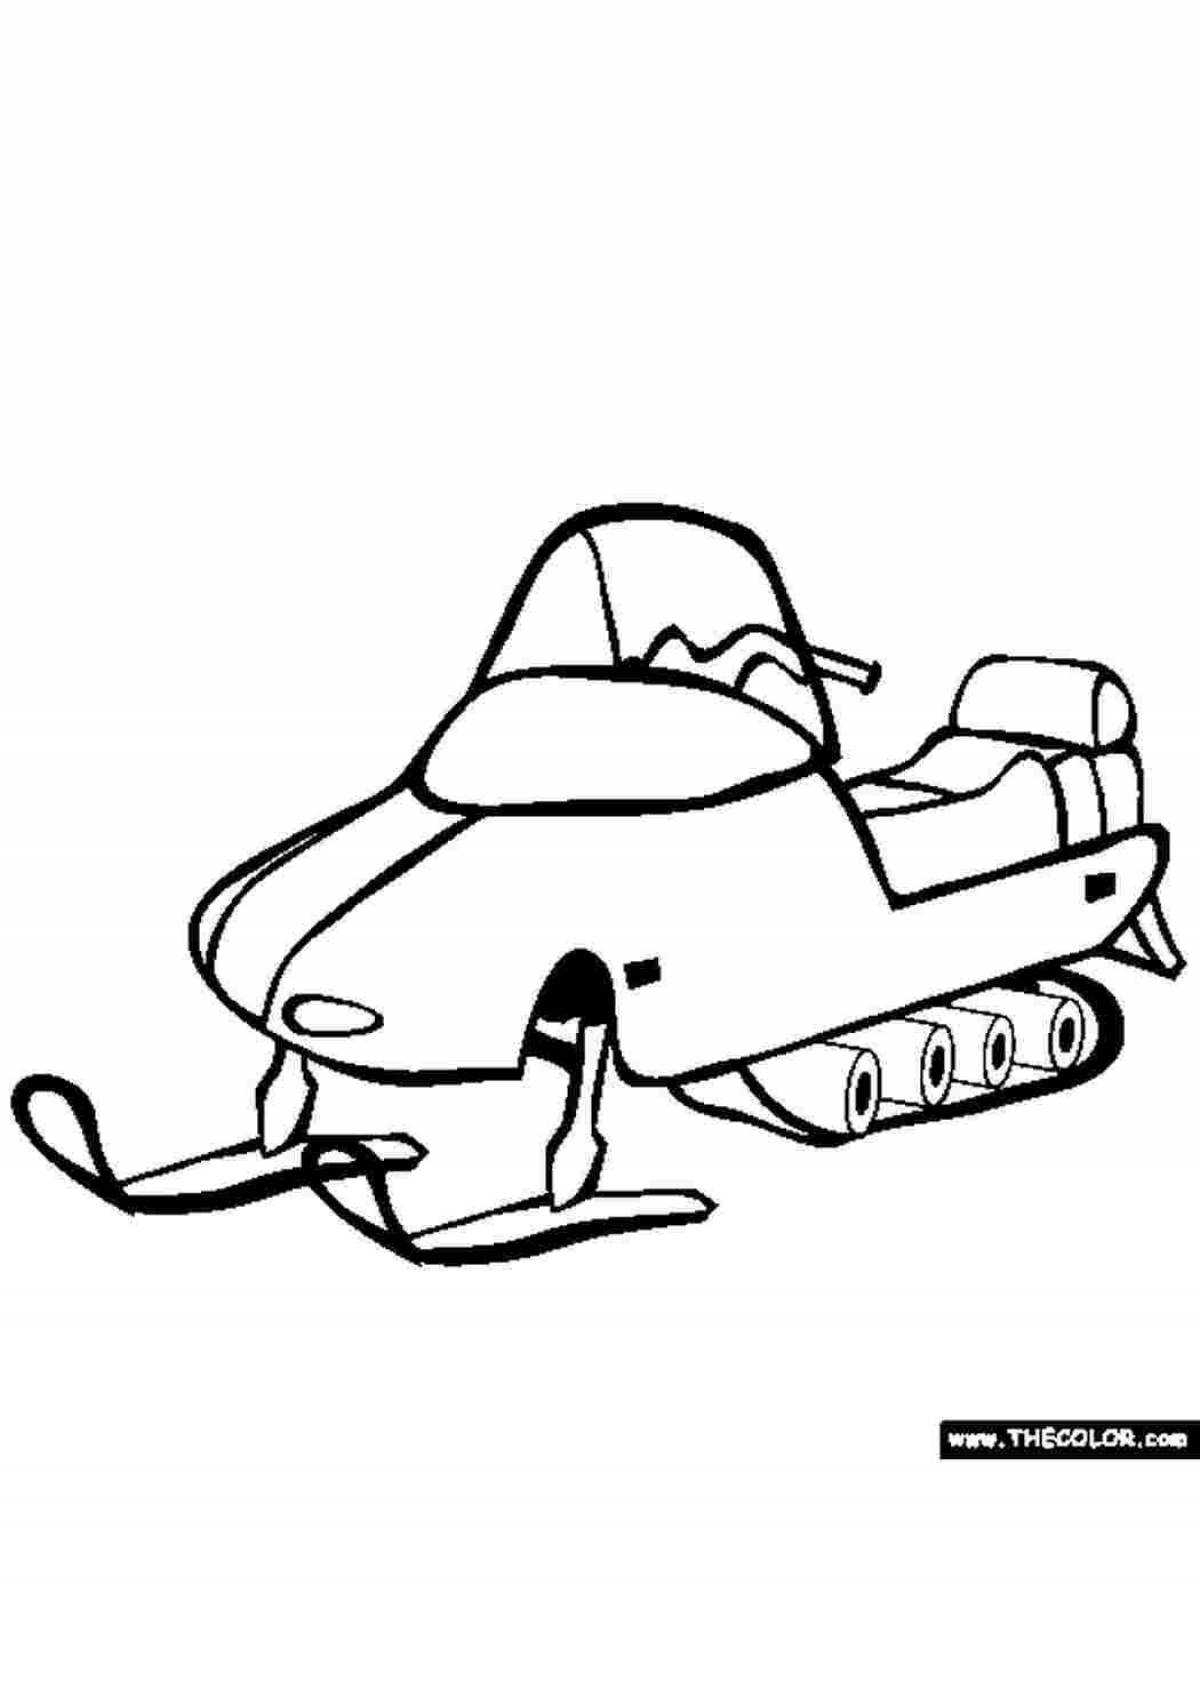 Coloring page exquisite snowmobile blizzard